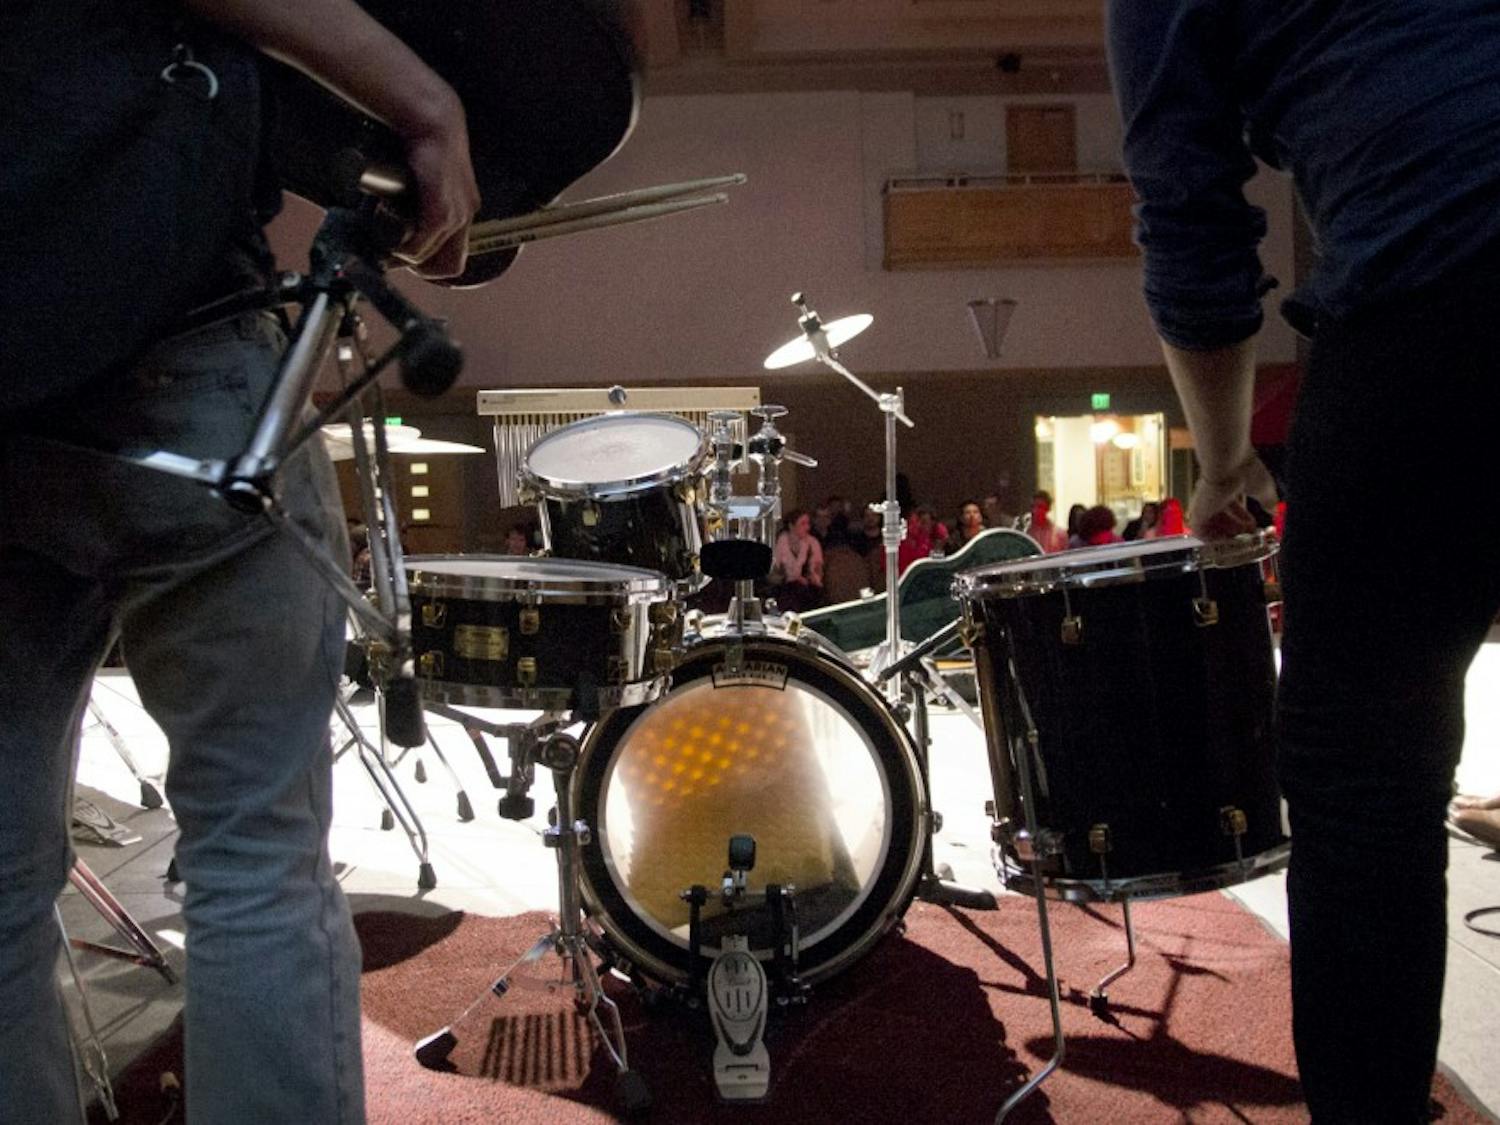 Sol De La Noche members set up their equipment at the 2015 Fight for Fiestas in the SUB Ballroom. Fight for Fiestas is a competition where bands battle for a spot in playing at the annual Fiestas outdoor concert. The 2016 Fight for Fiestas will be held in the SUB Ballroom this Tuesday at 7:30 p.m..